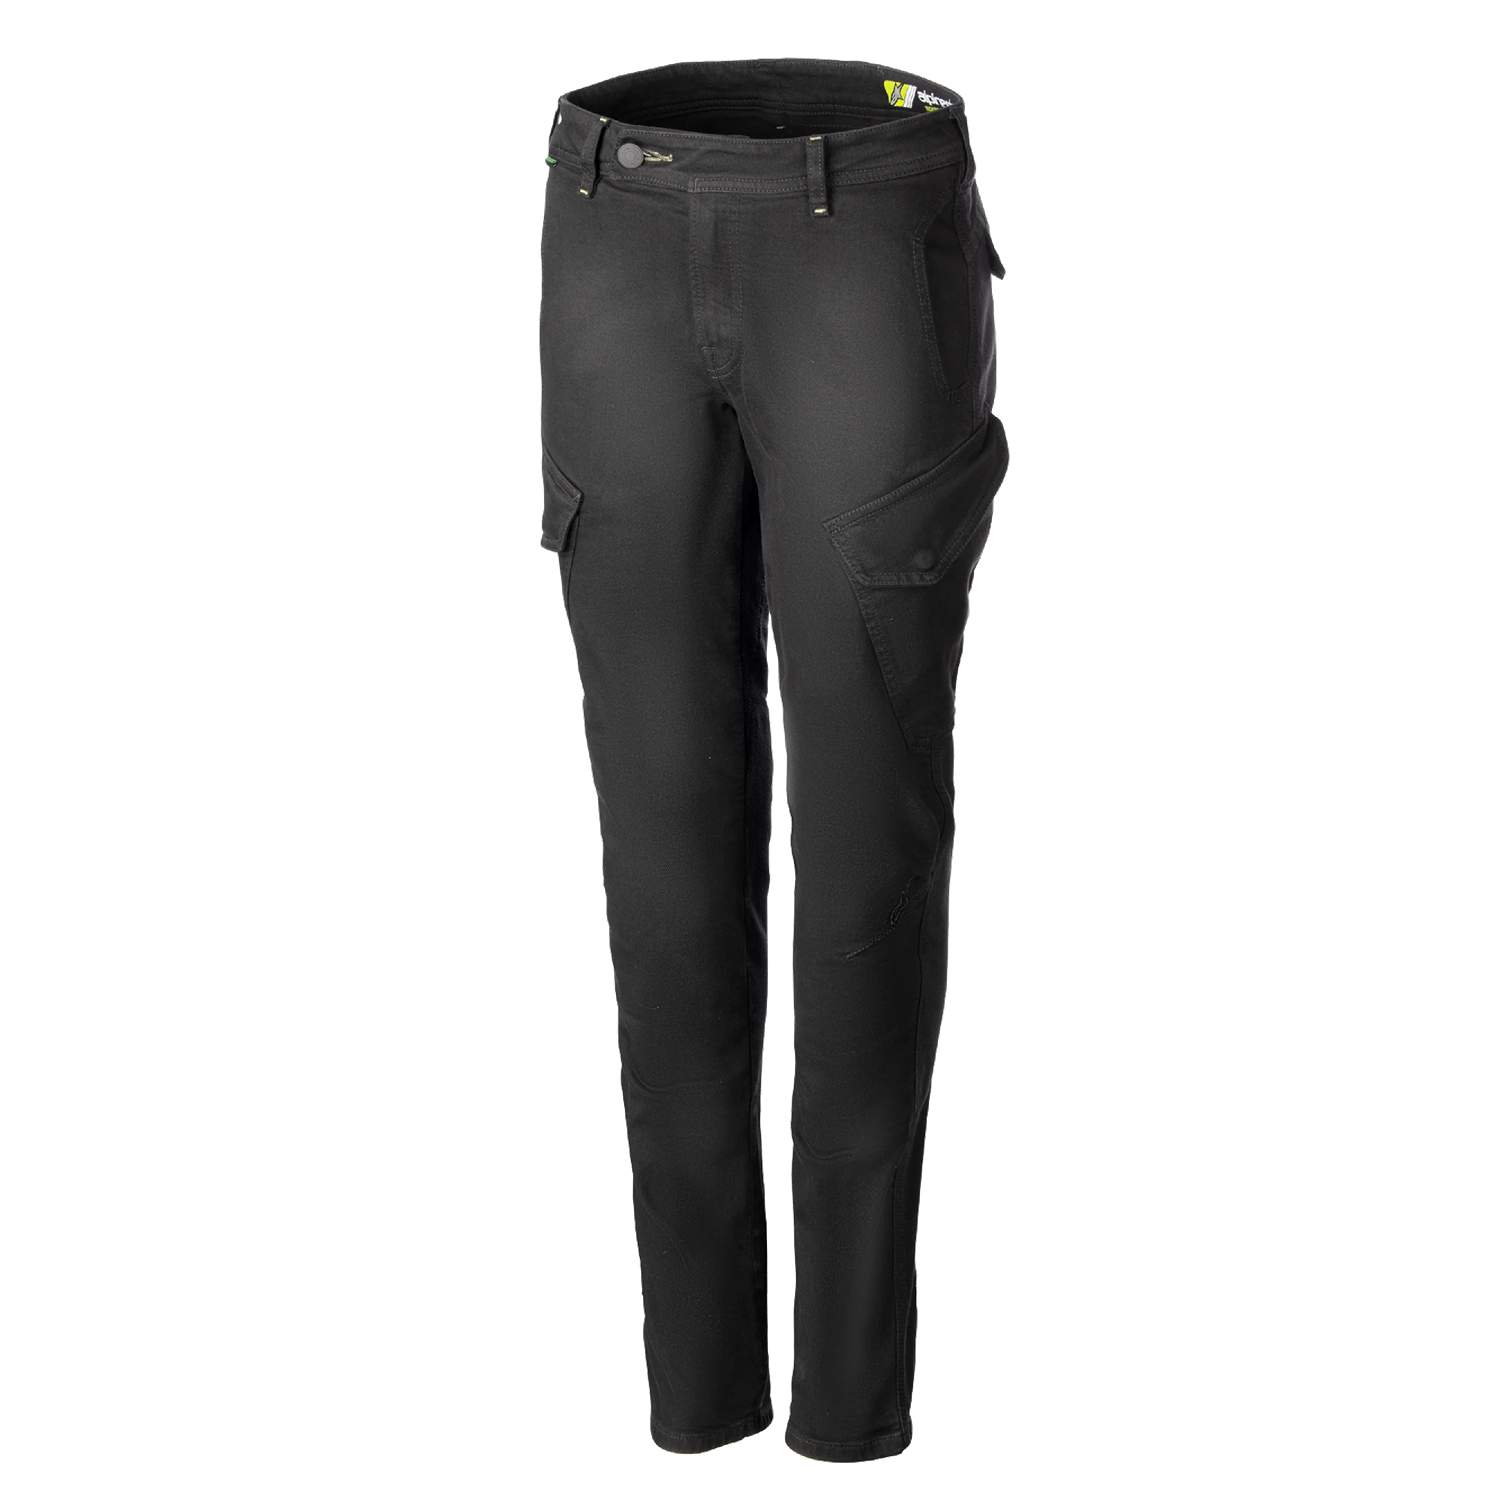 Image of Alpinestars Caliber Women's Tech Riding Pants Anthracite Taille 27